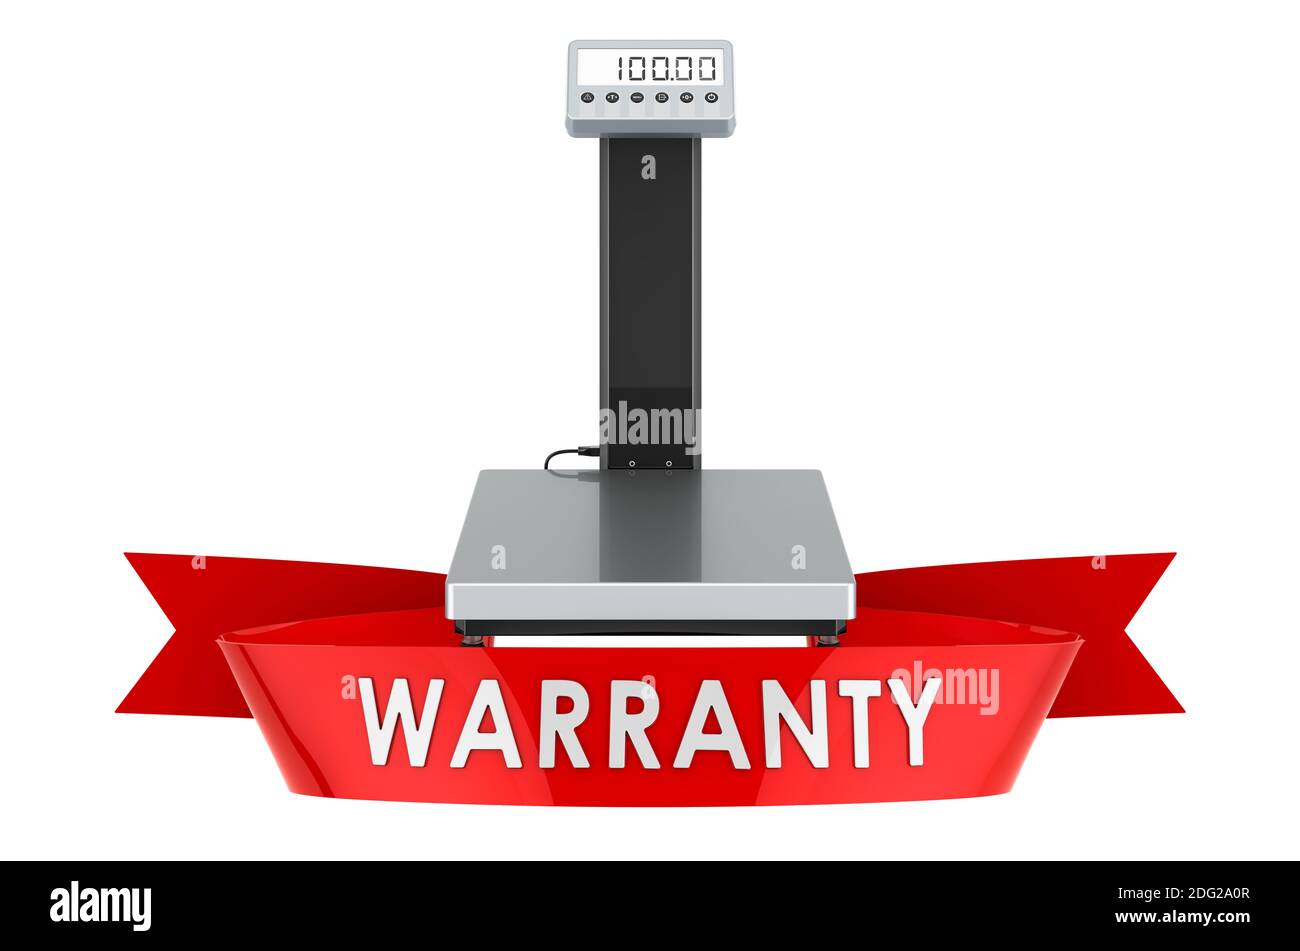 https://c8.alamy.com/comp/2DG2A0R/warehouse-scales-warranty-concept-3d-rendering-isolated-on-white-background-2DG2A0R.jpg